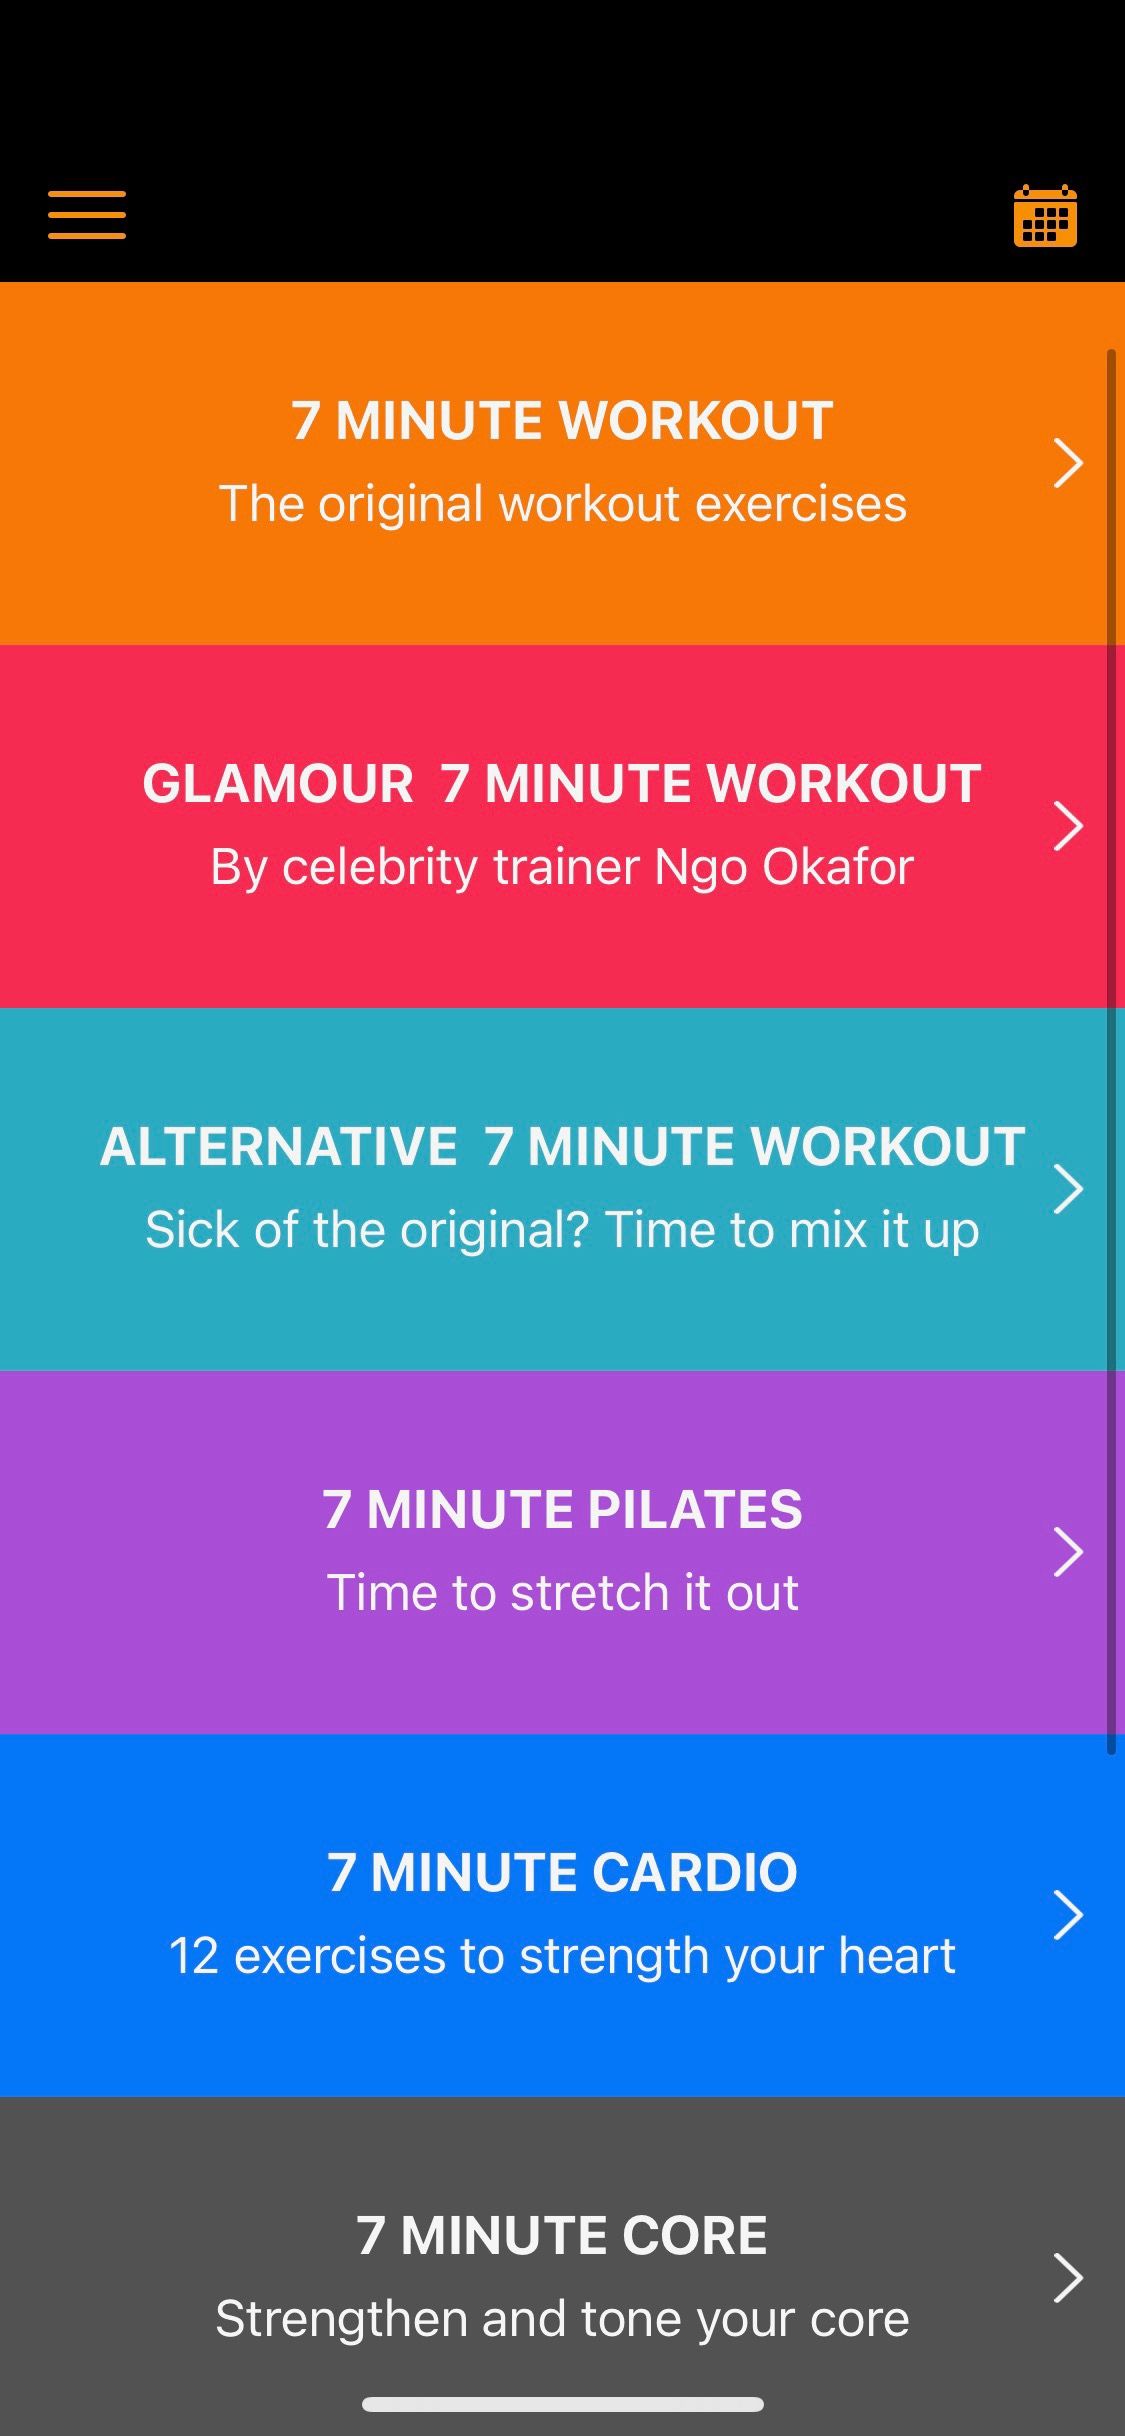 7 Of The Best Fitness Apps For Women — Fit Her